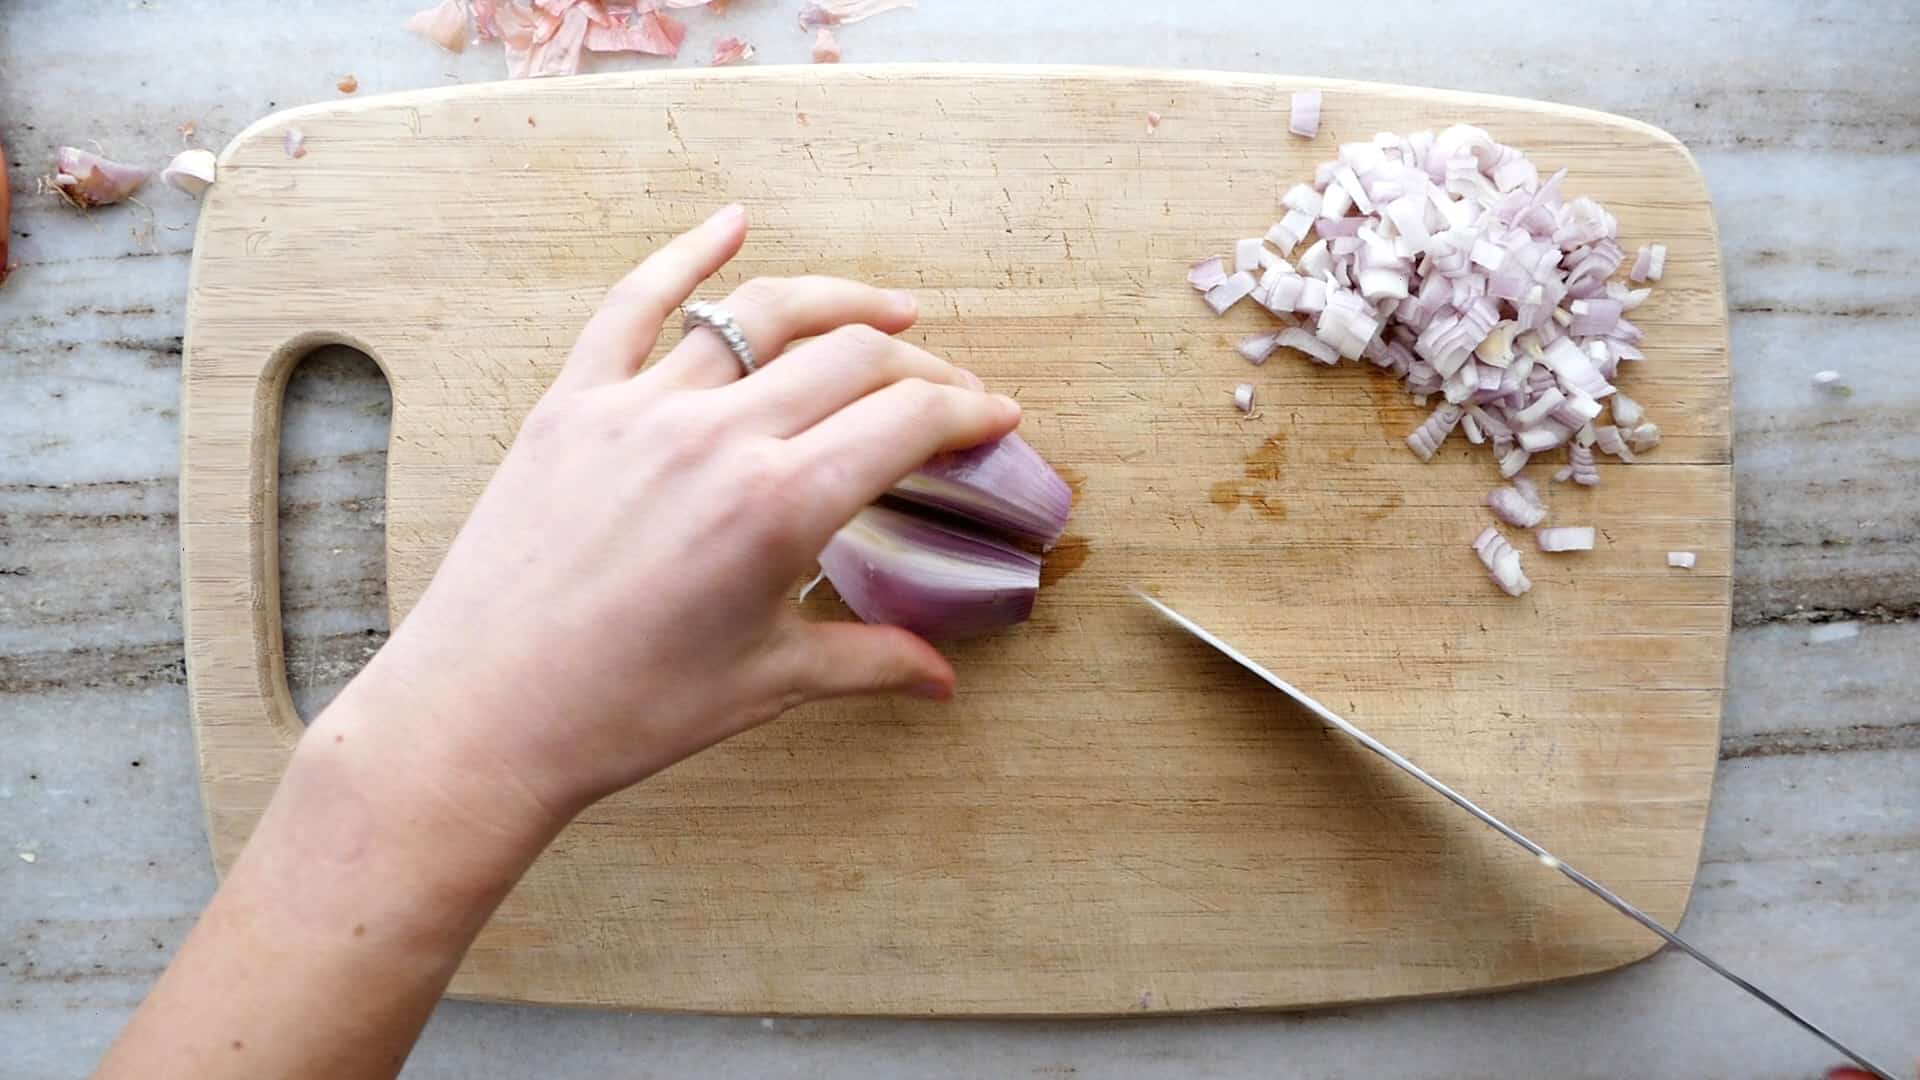 woman cutting a shallot in half lengthwise on a bamboo cutting board